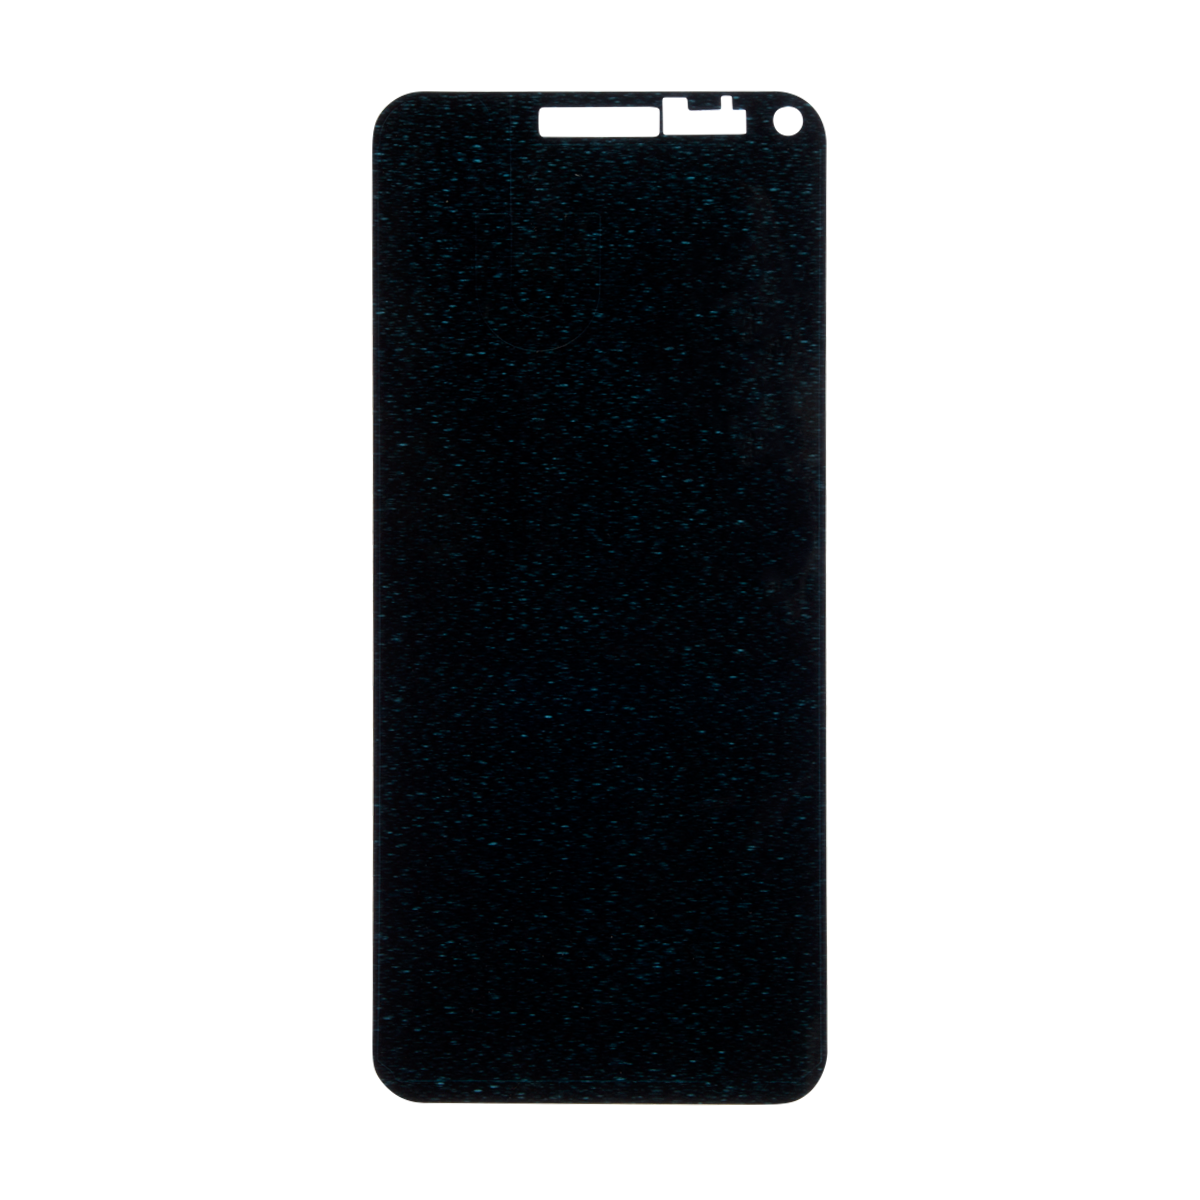 Google Pixel 3a LCD Frame Adhesive